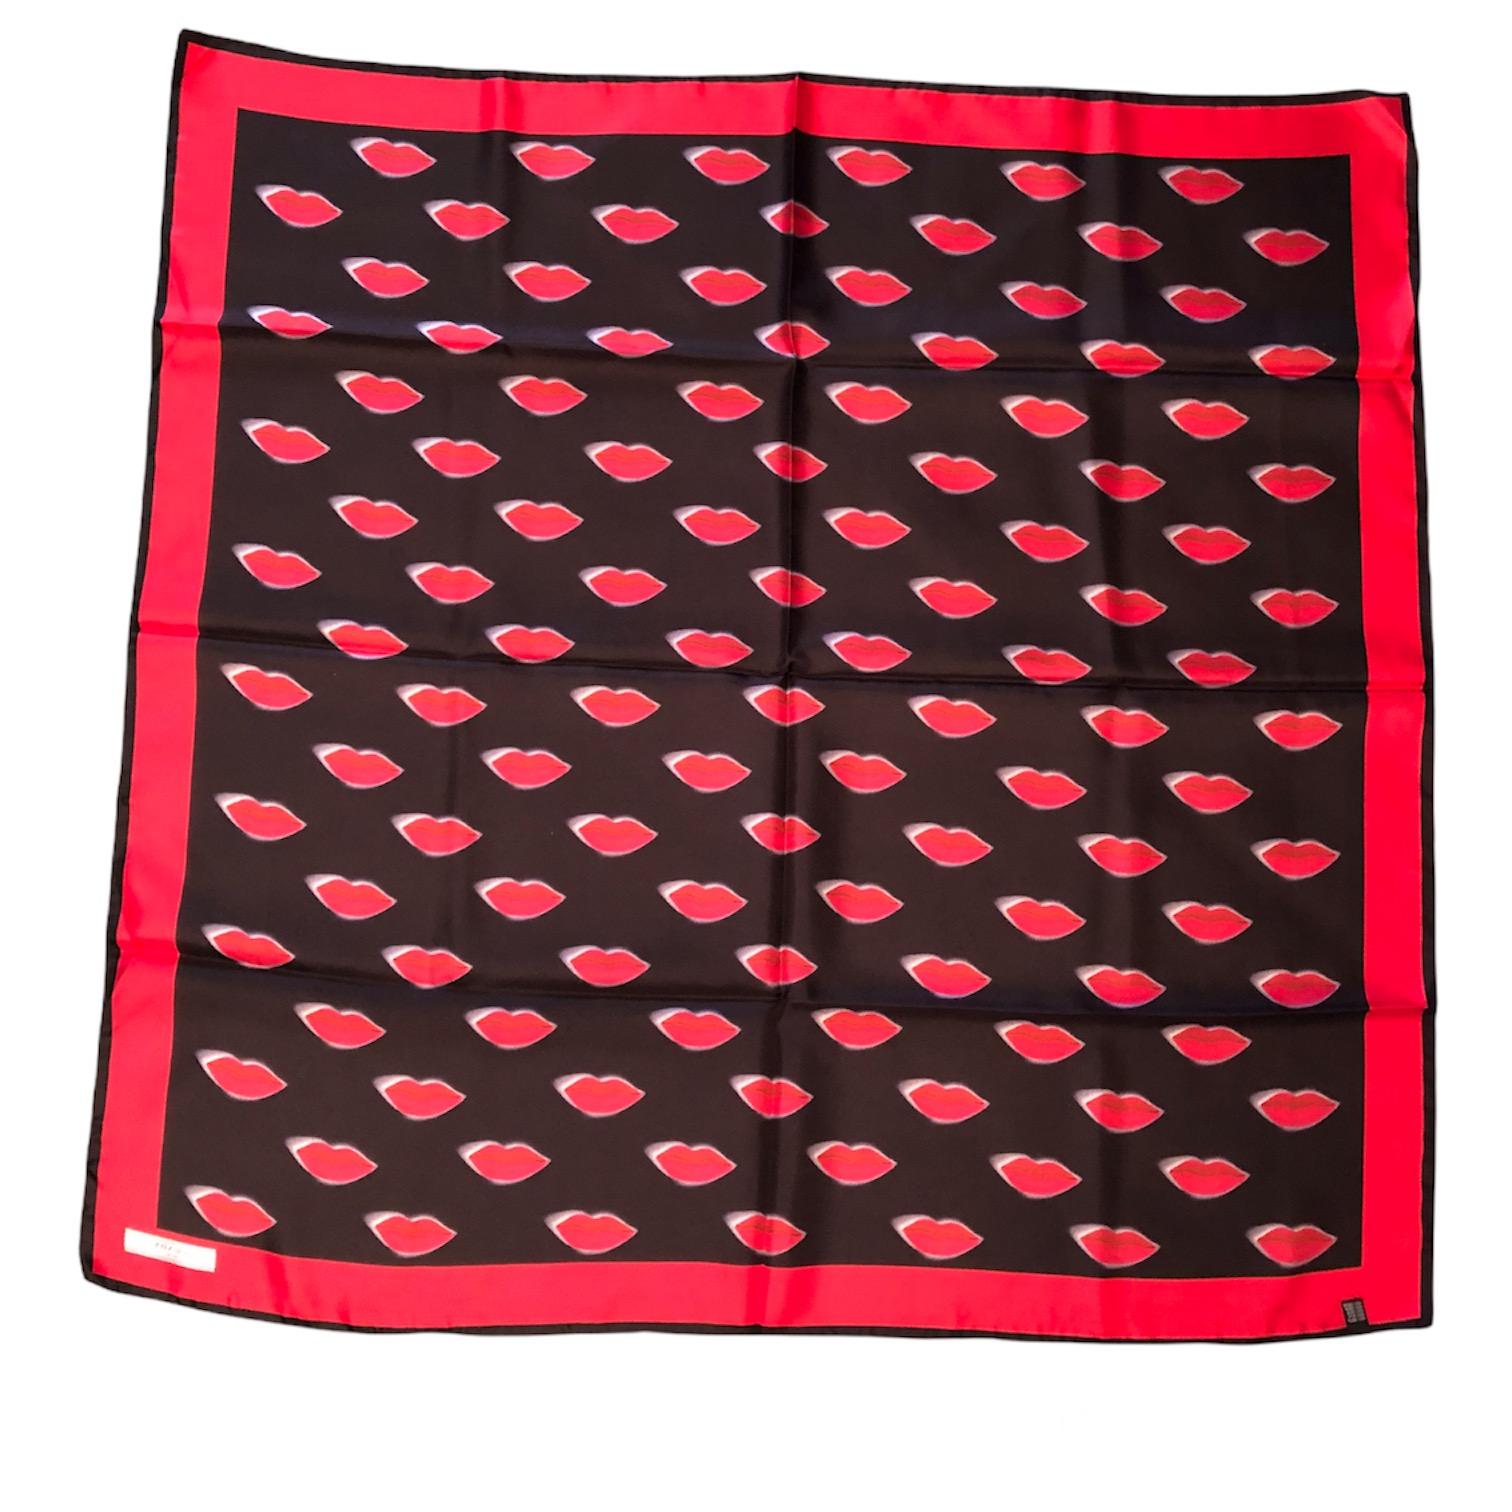 Prada silk scarf with lips. It measures approximately 90 x 90 cm. New never been used.